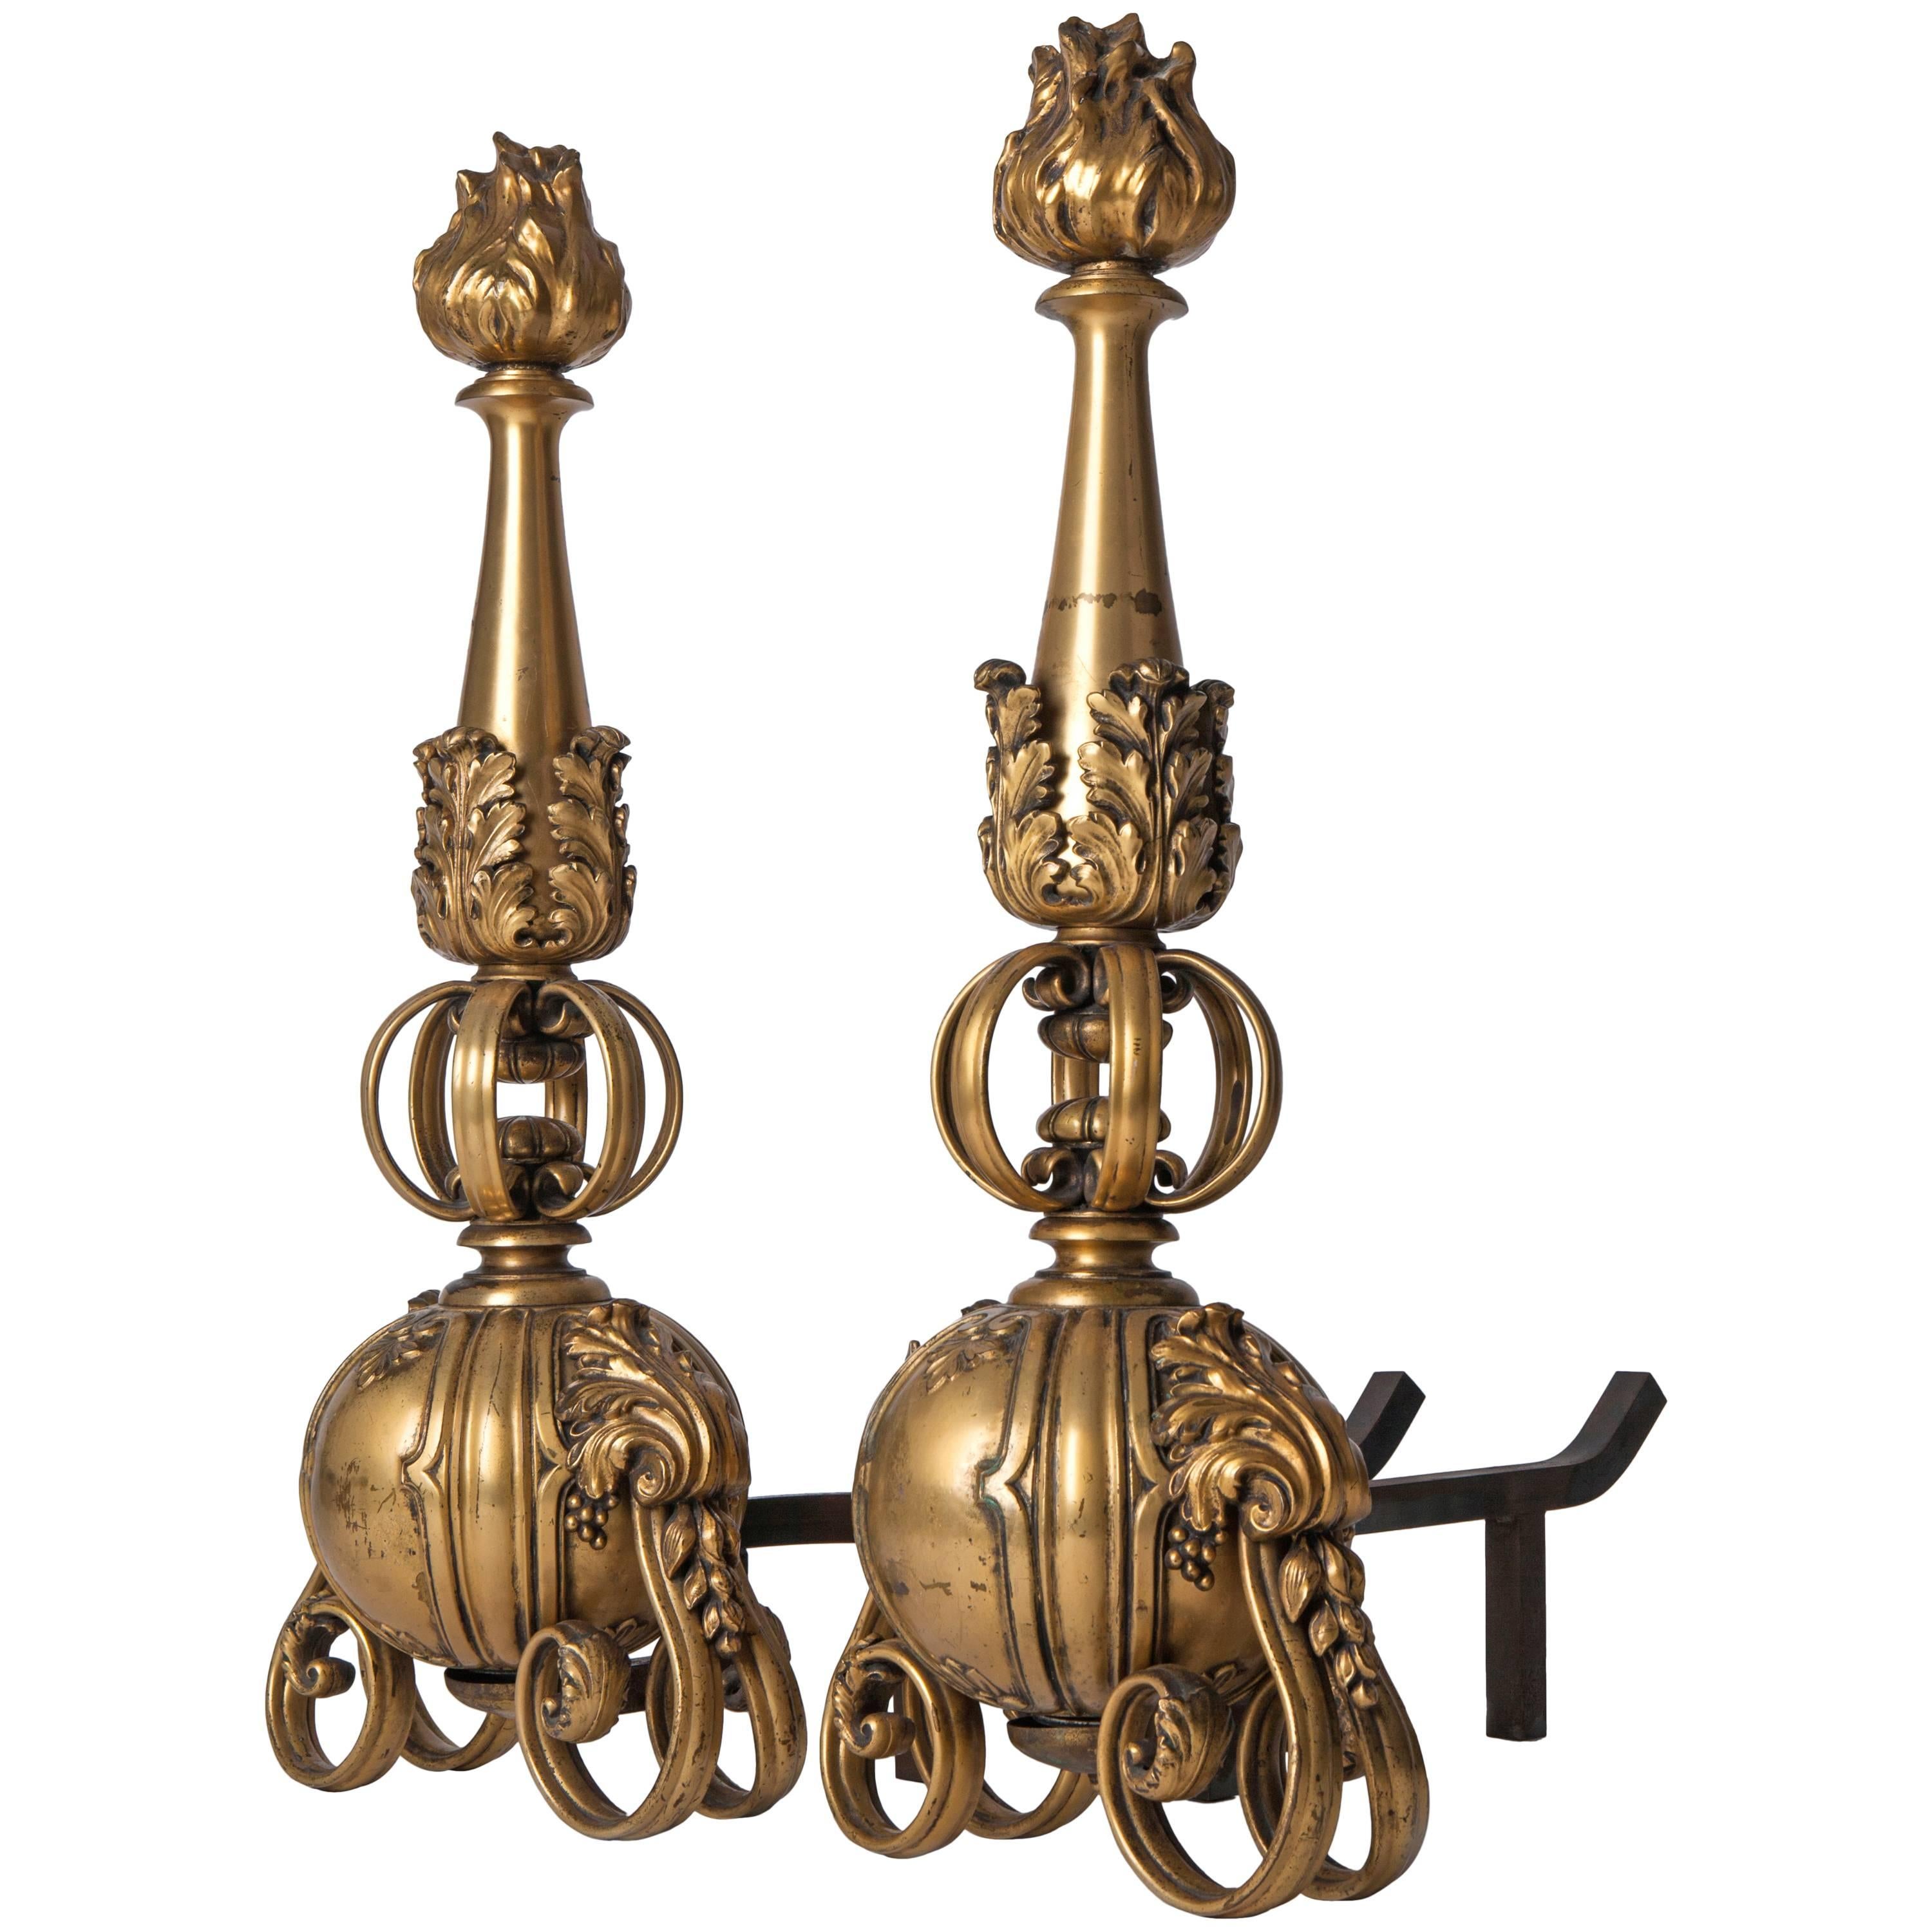 Gilded Bronze Andirons with Scrolls Attributed to Sterling Bronze Co. Circa 1920